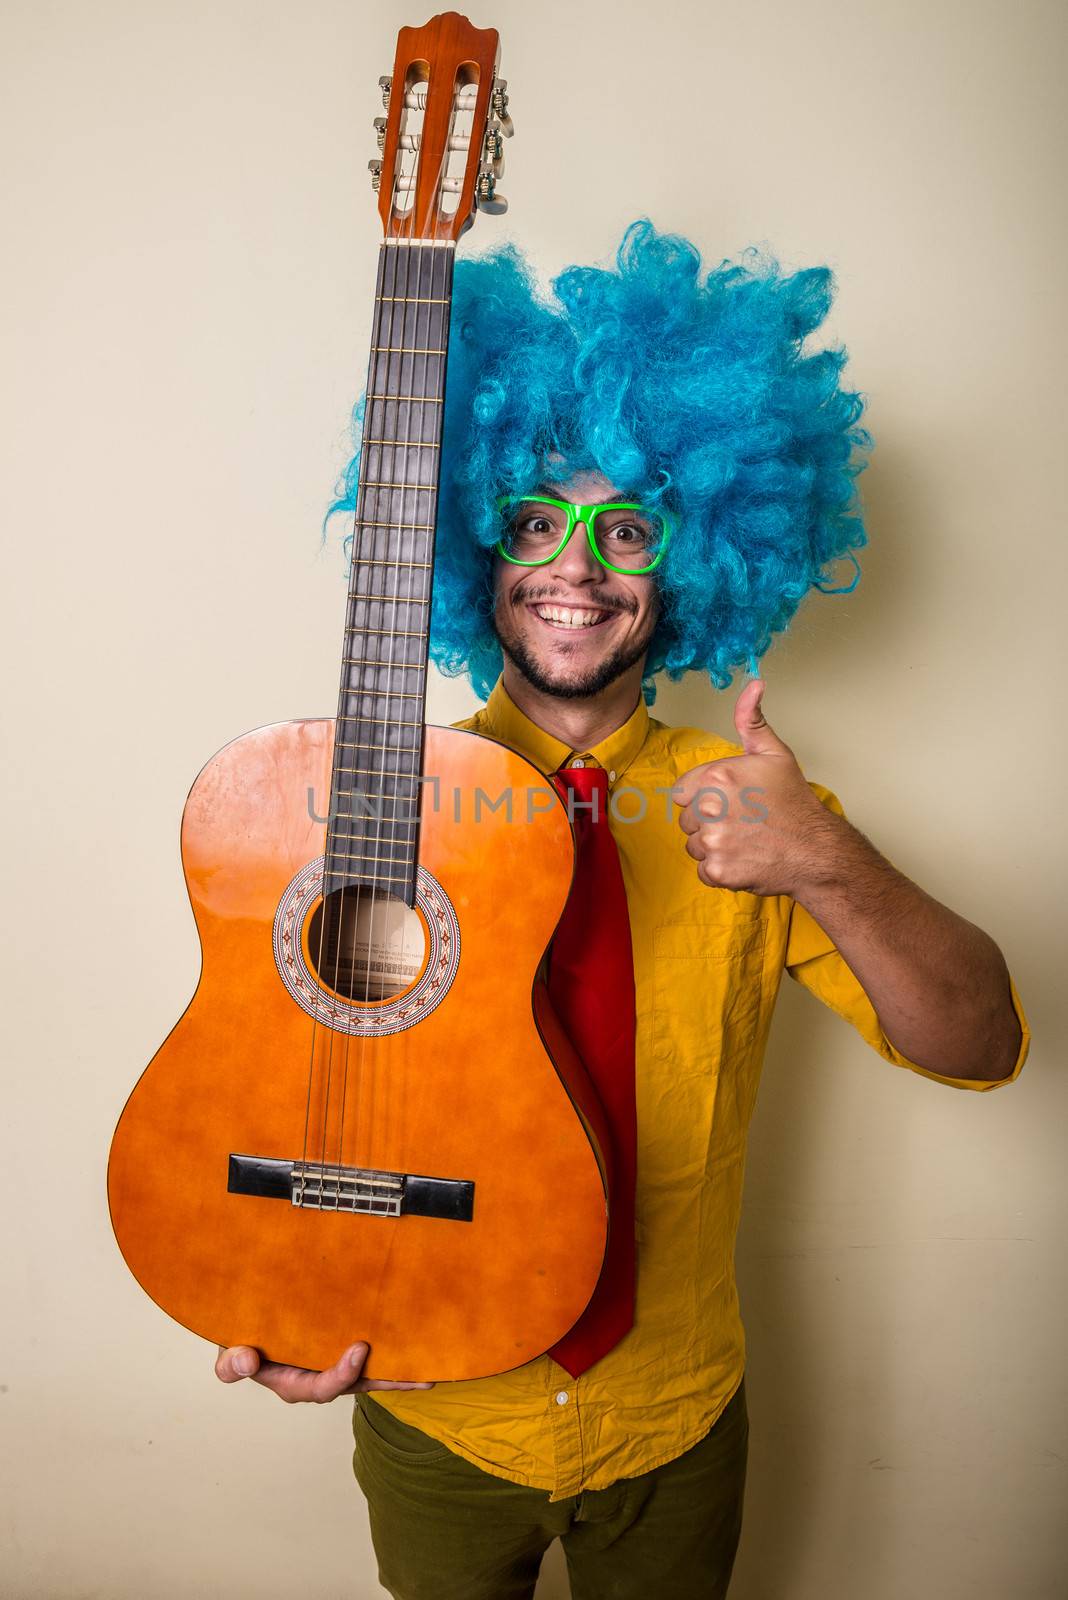 crazy funny young man with blue wig on white background